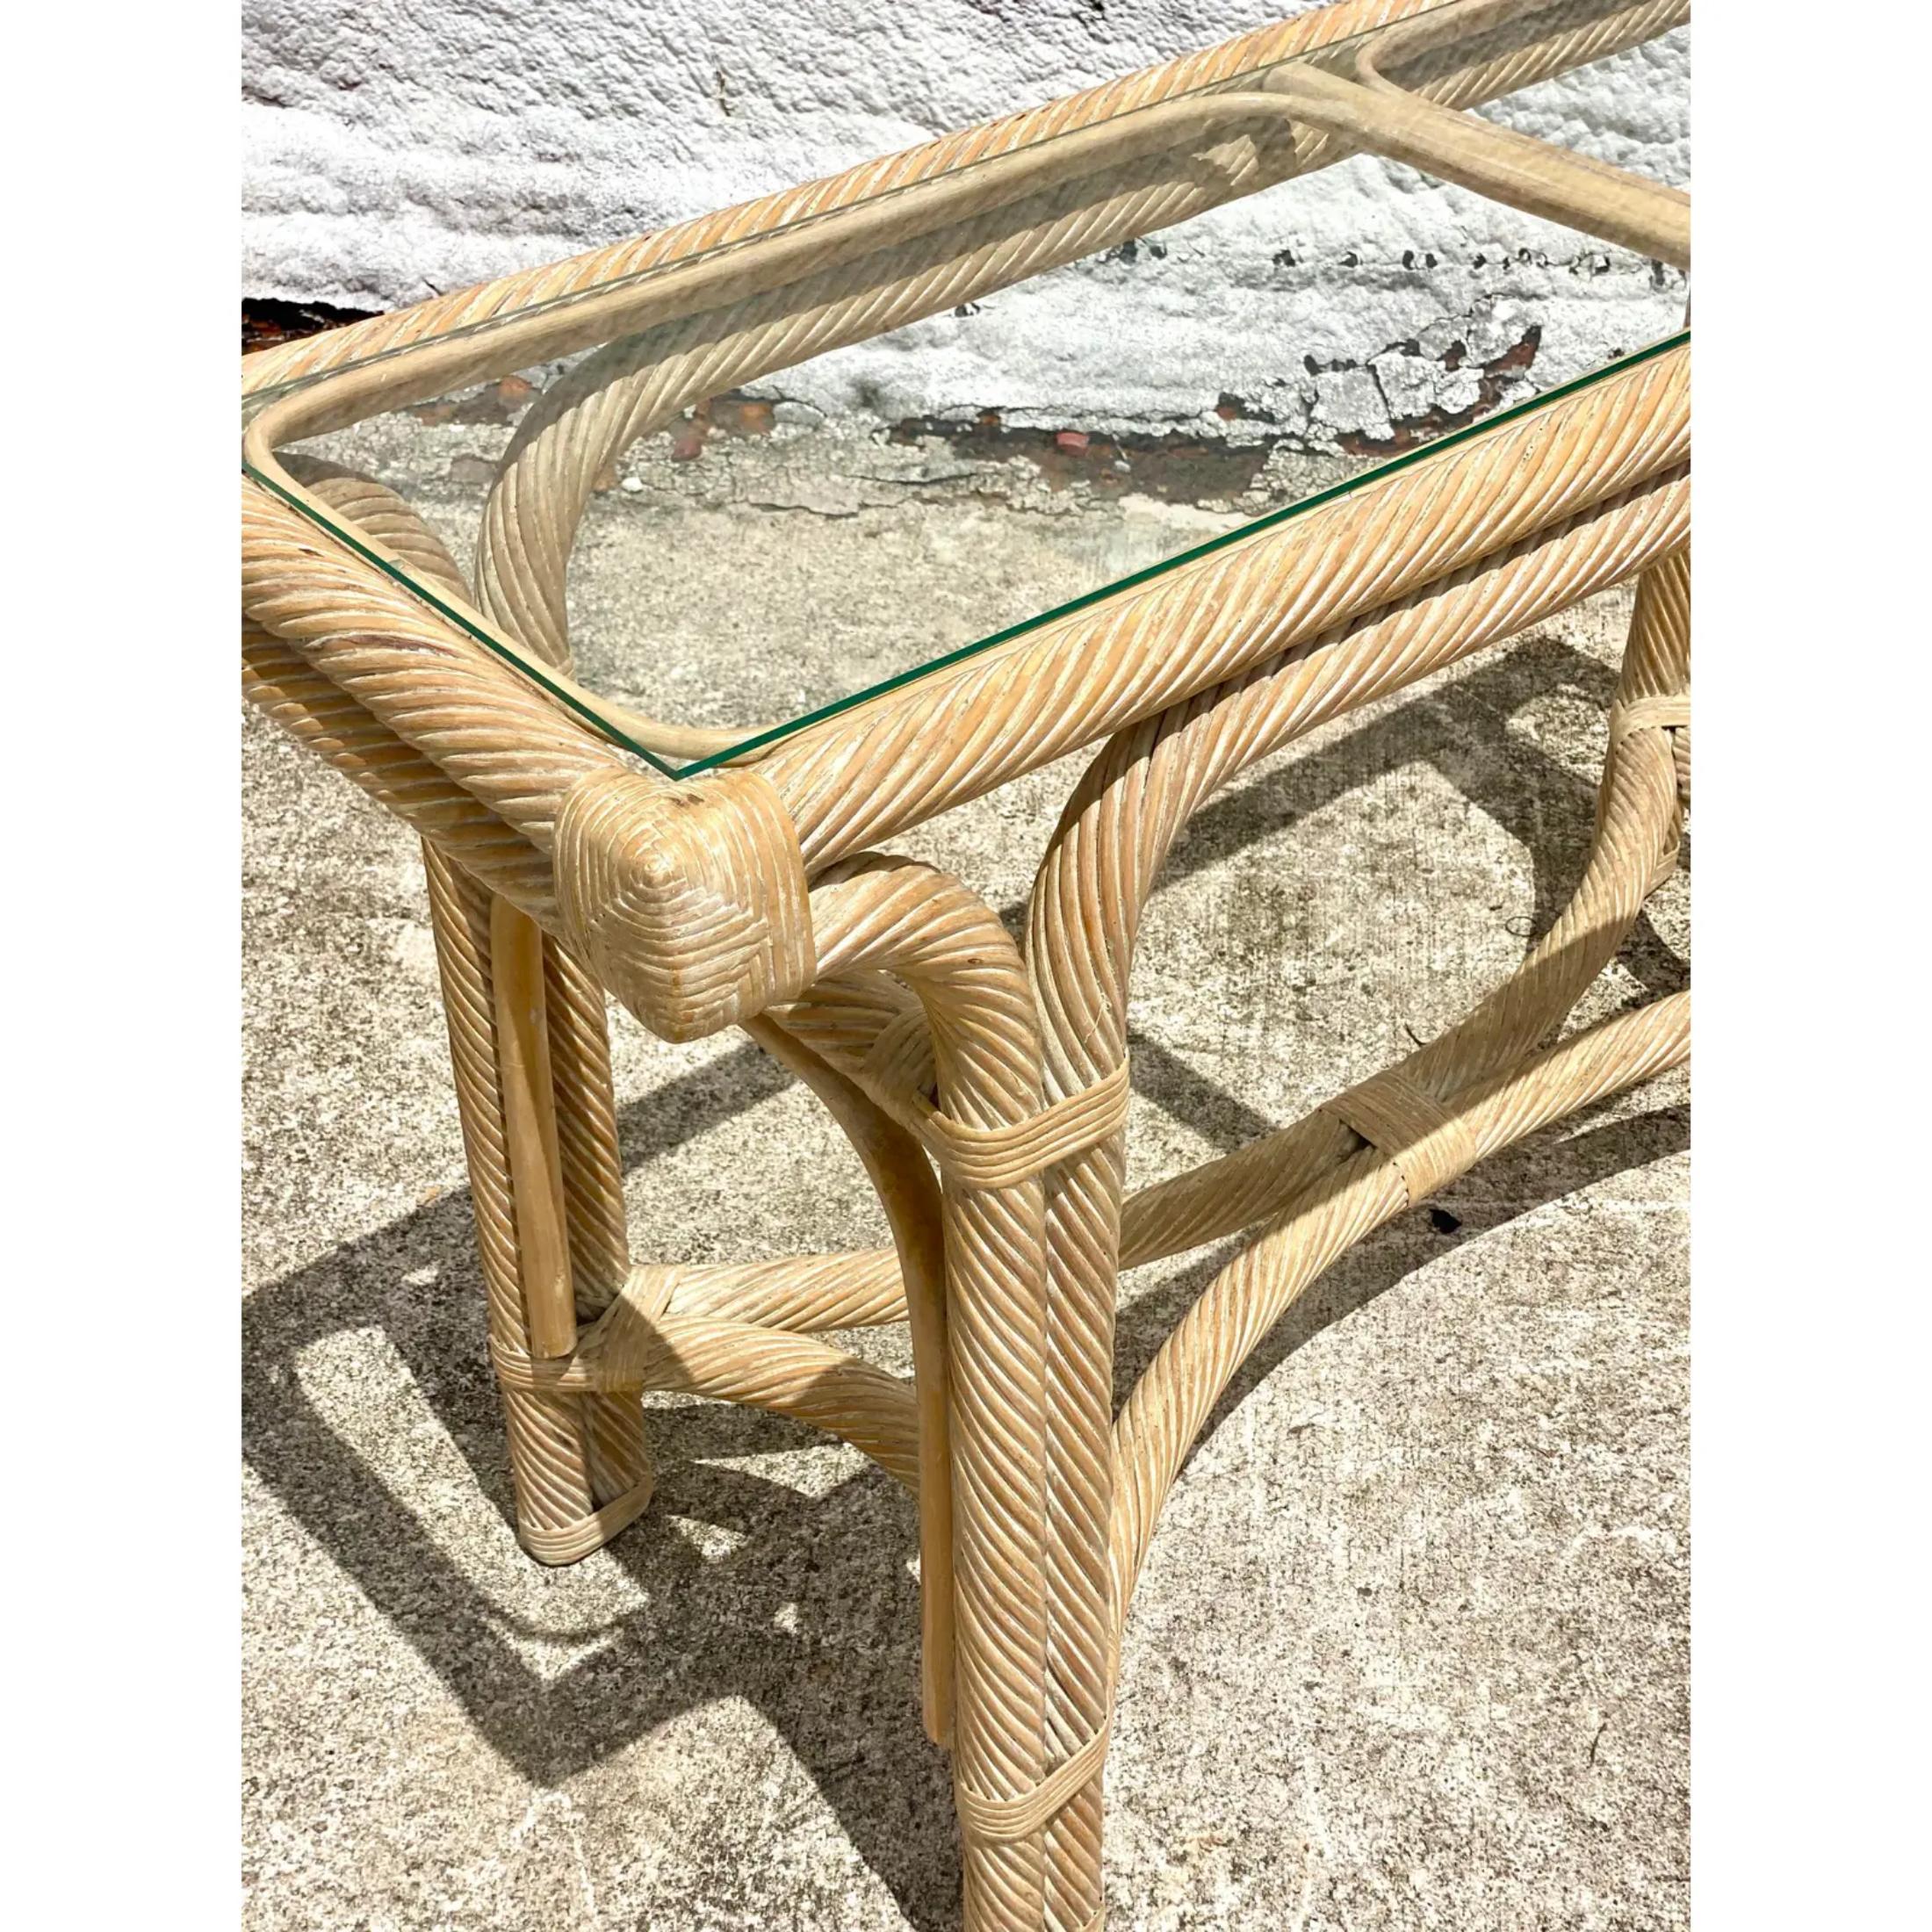 Fantastic vintage console table. Made from a cerused pencil reed in a twisted frame design. Inset glass top. Acquired from a Palm Beach estate.